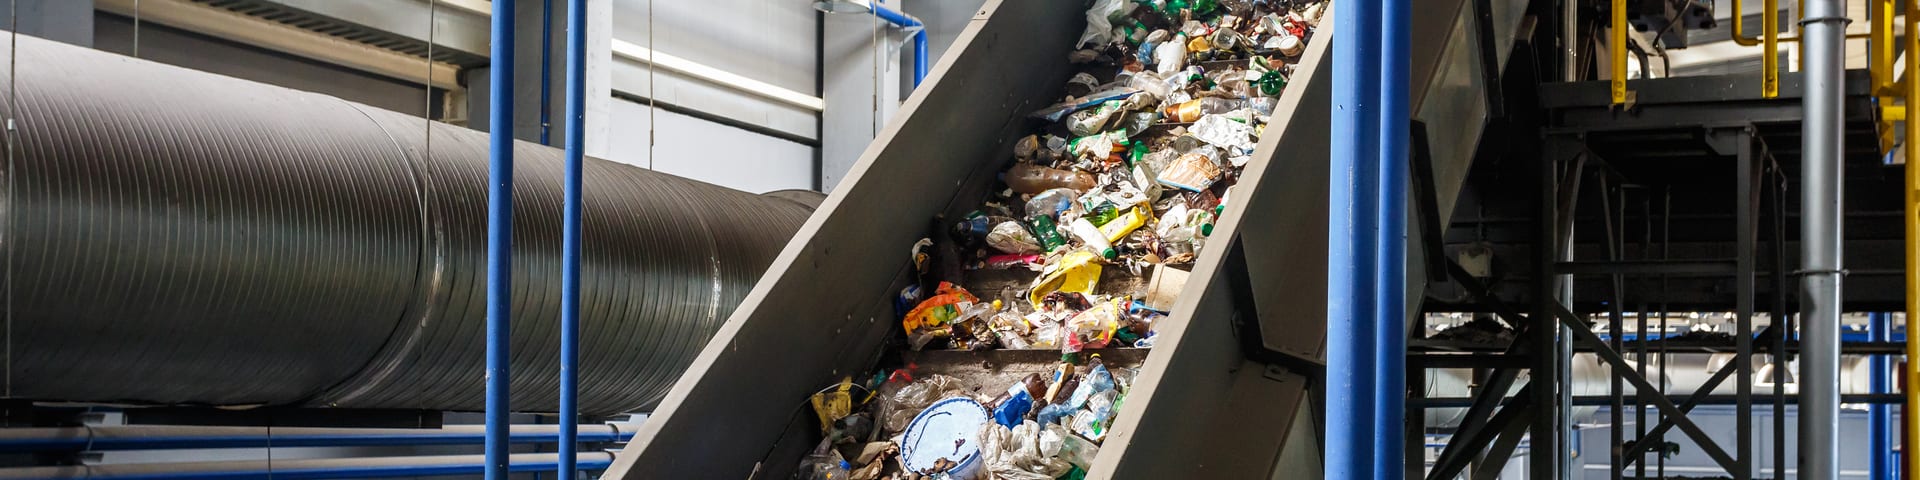 Recycling Facilities May Be Hazardous to Workers’ Health